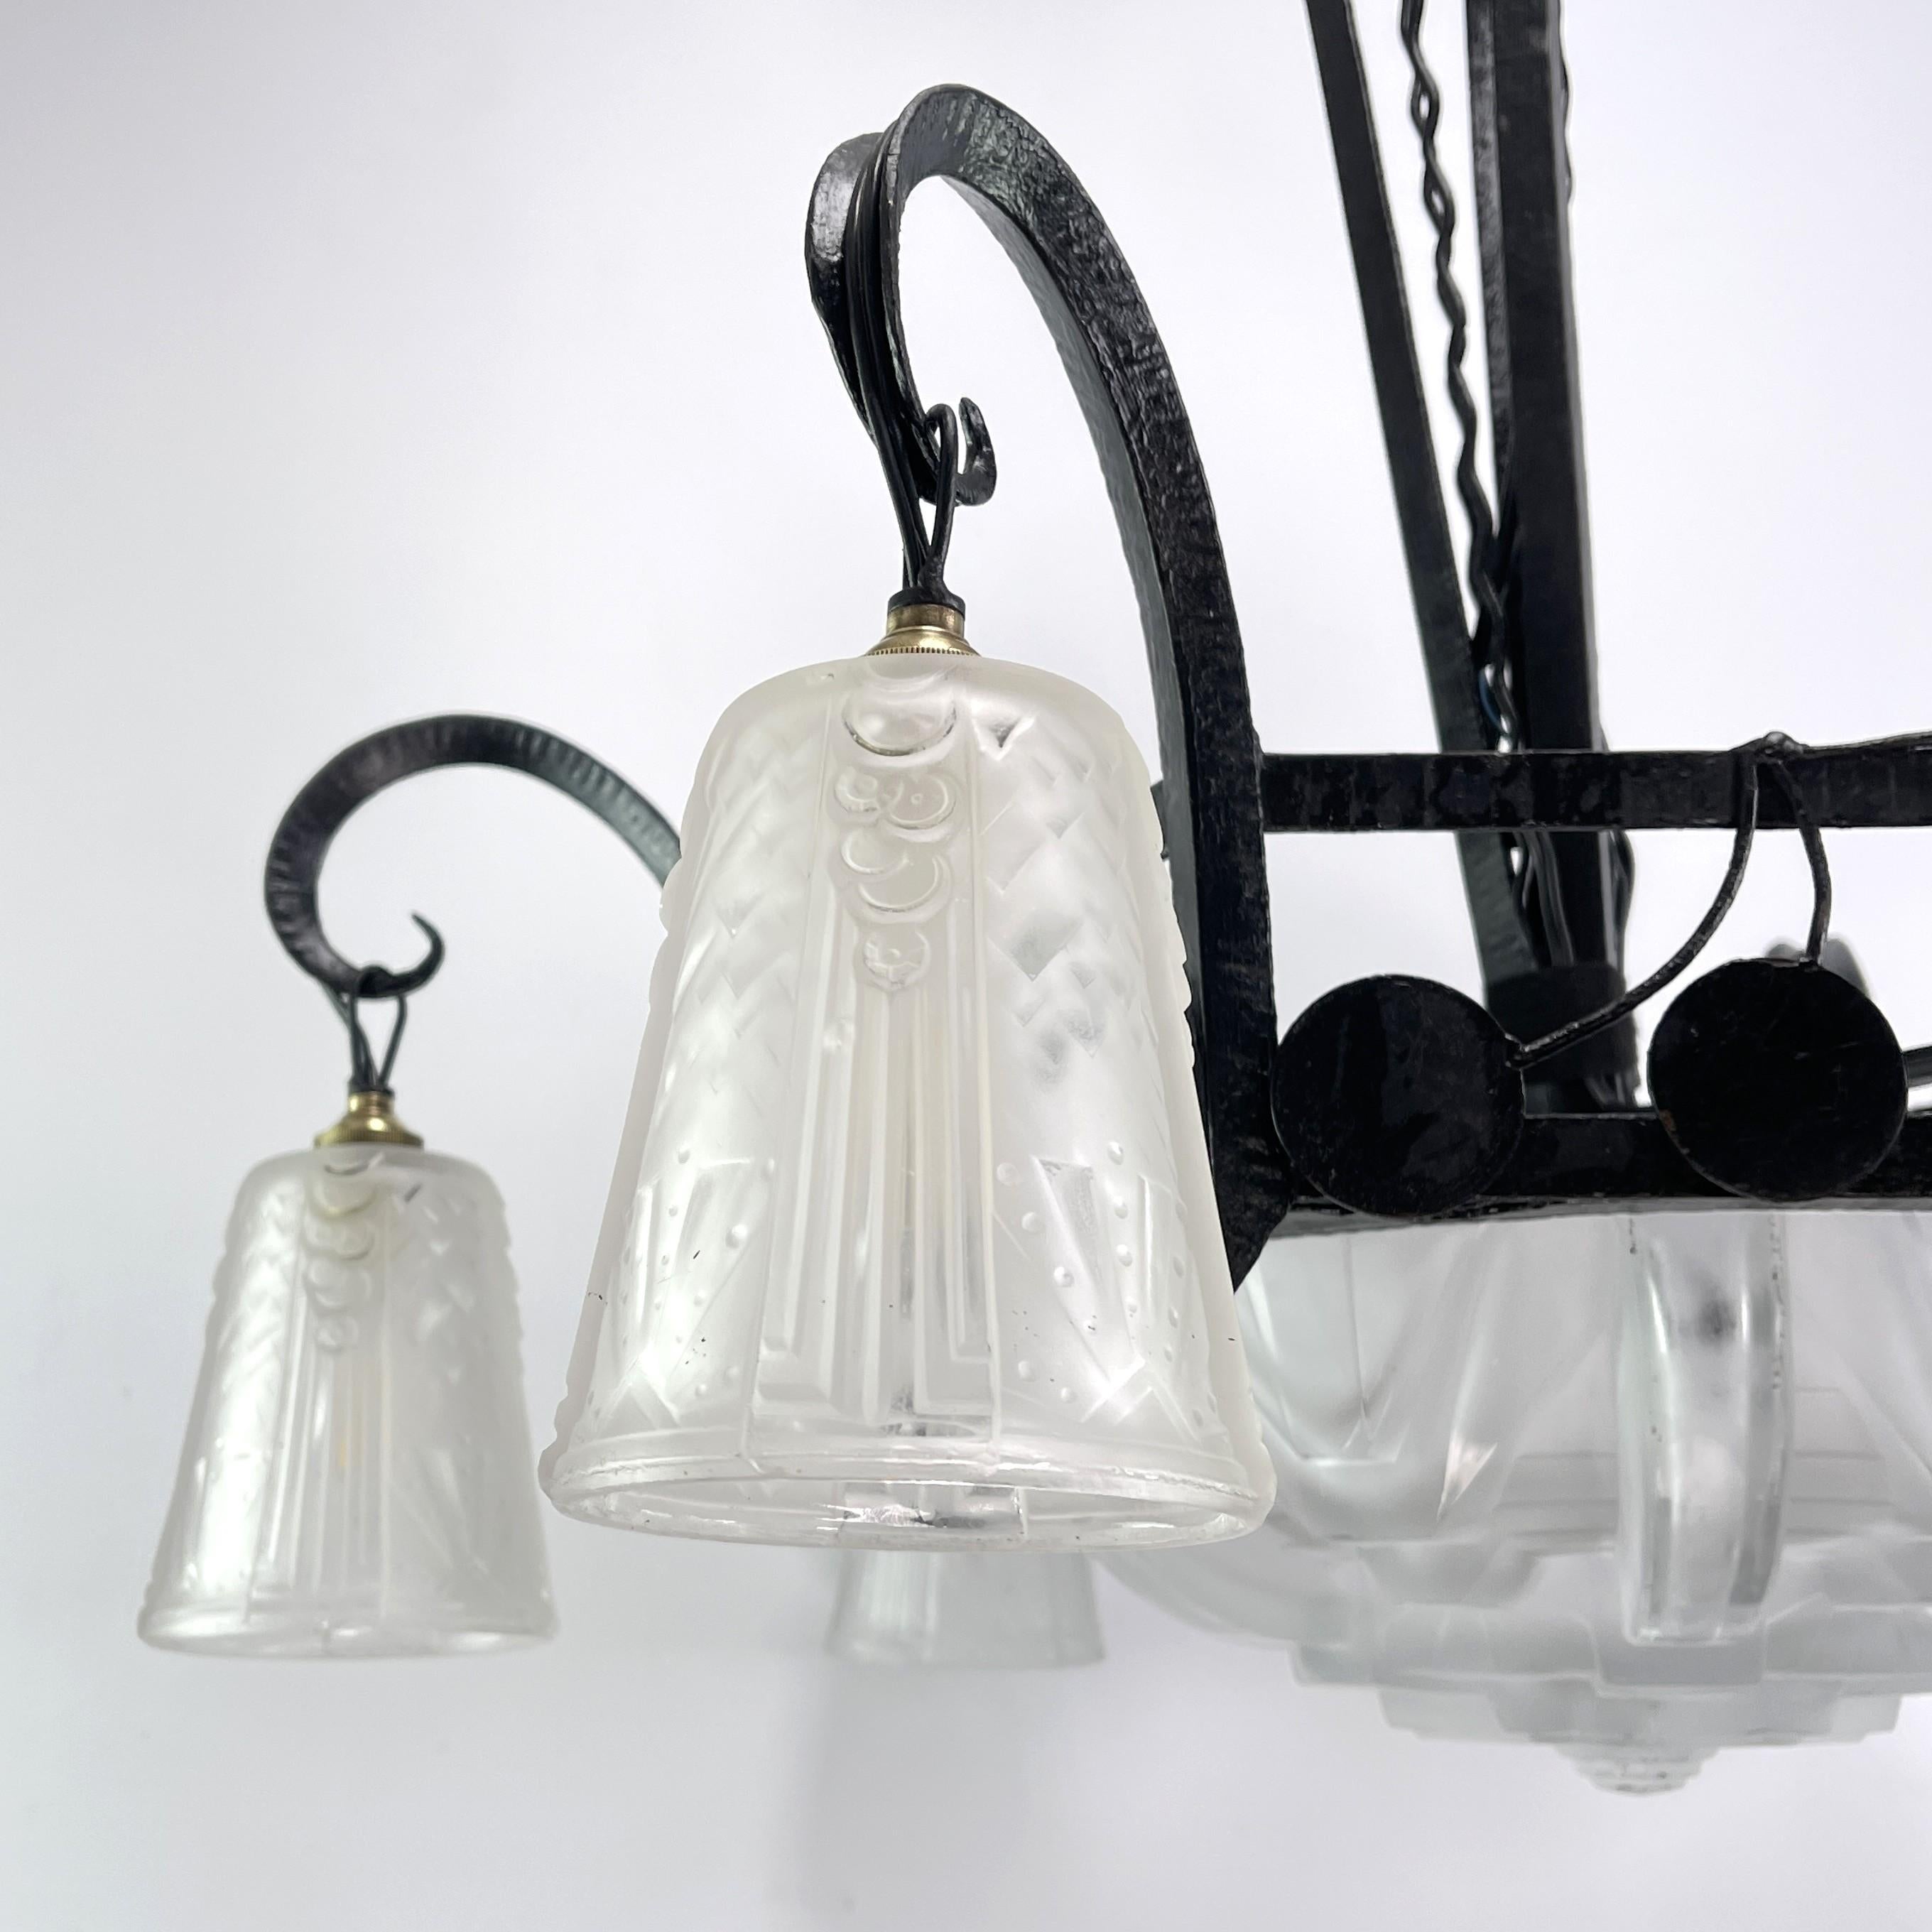 Art Deco wrought iron Ceiling Lamp by Muller Freres, Luneville, 1930s For Sale 1